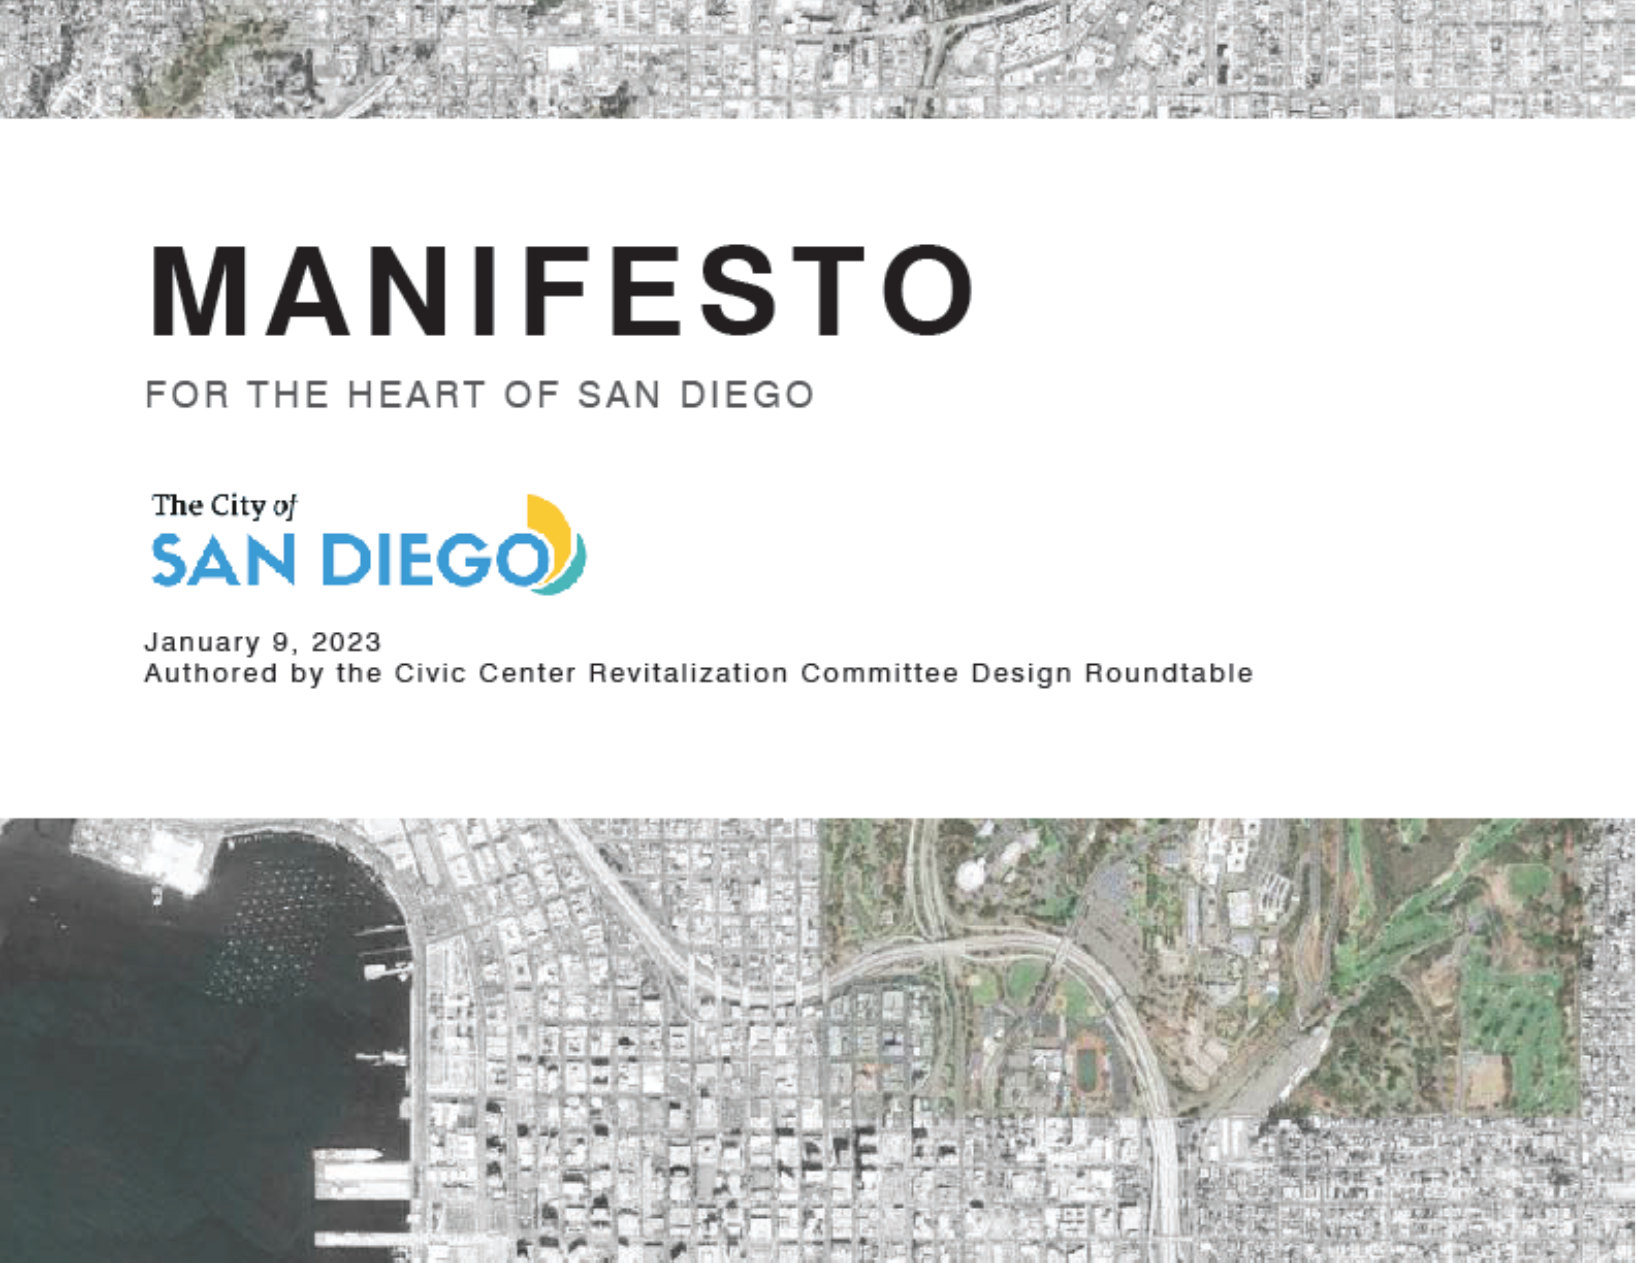 Manifesto for the Heart of San Diego